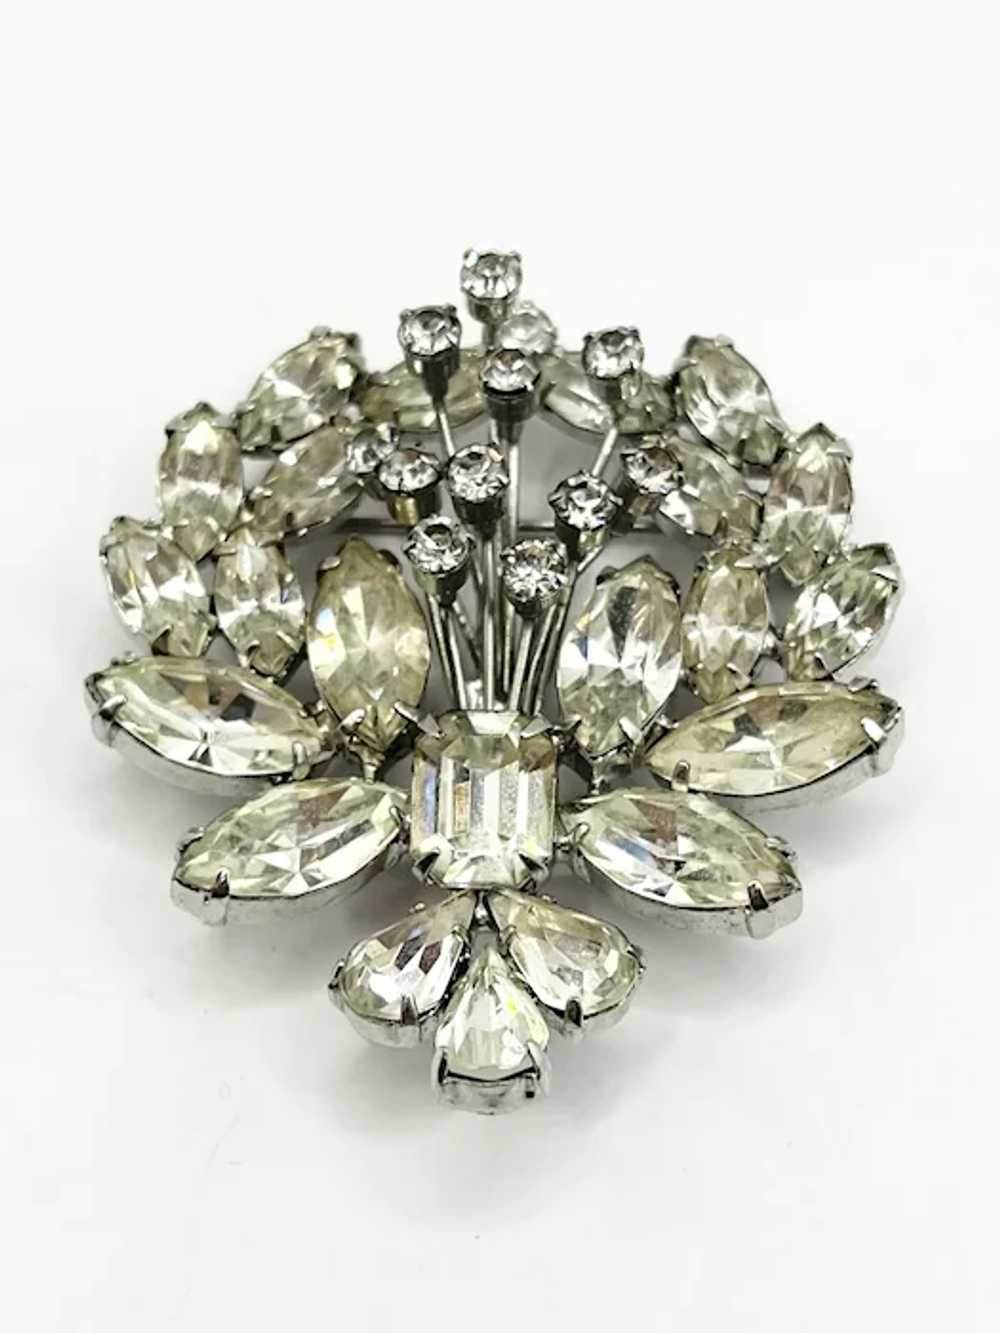 Vintage Signed Weiss Rhinestone Brooch pin - image 4